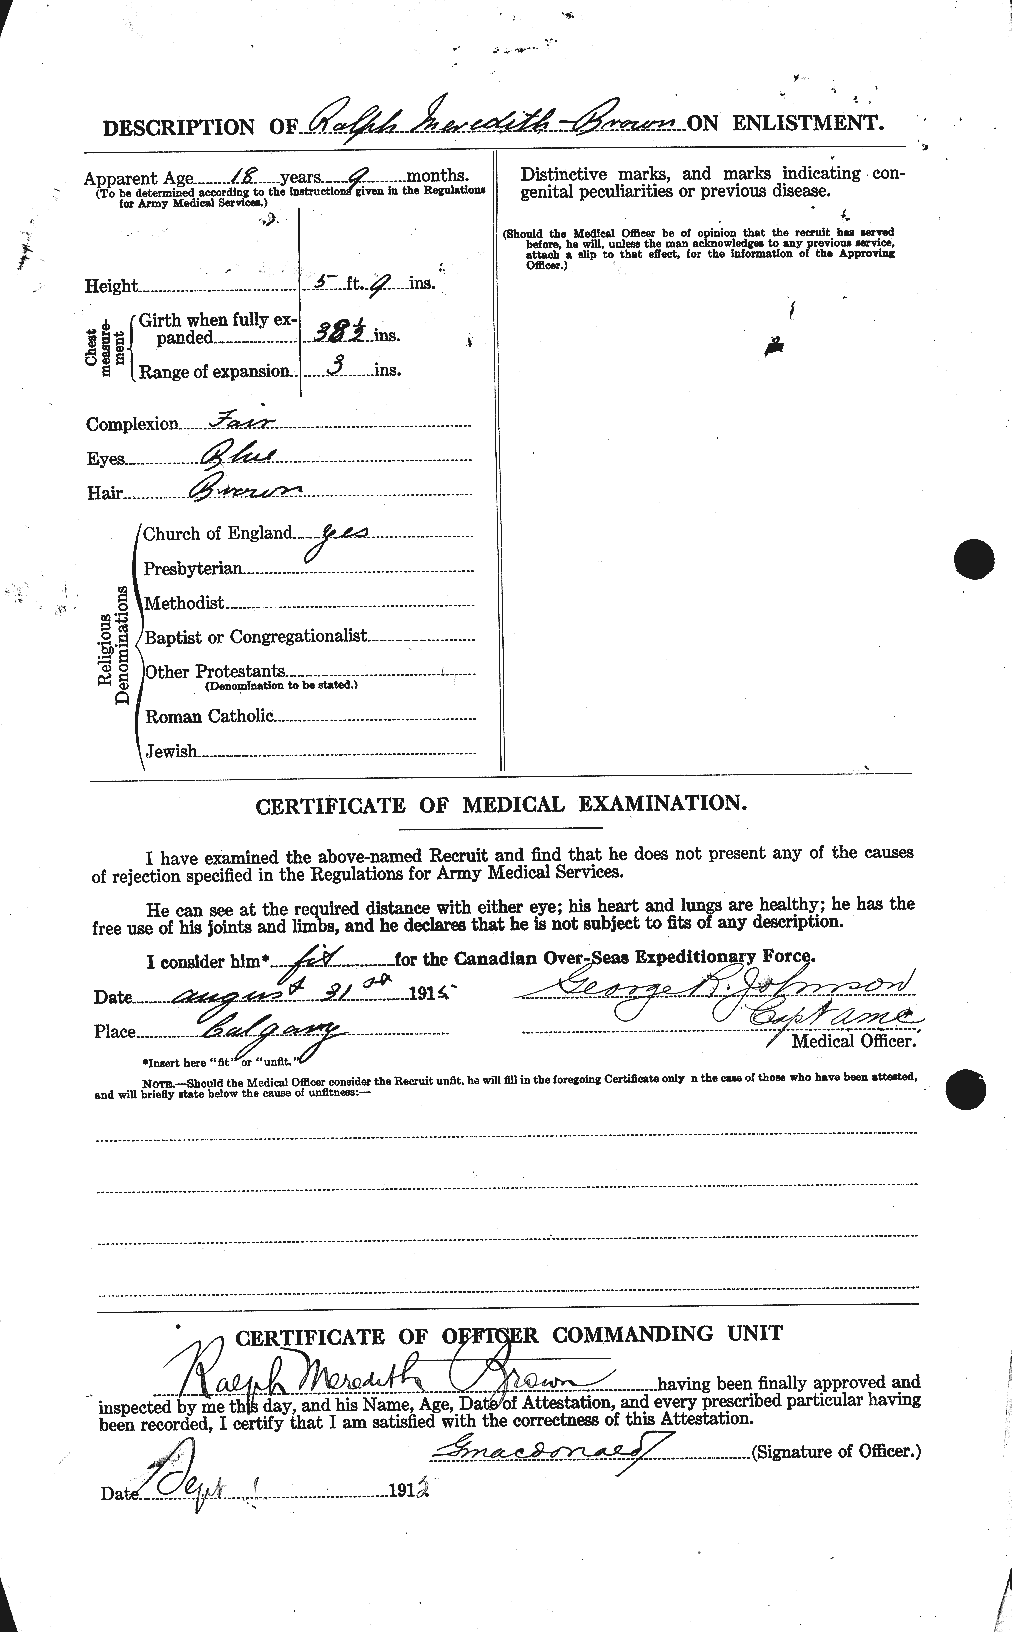 Personnel Records of the First World War - CEF 495918b